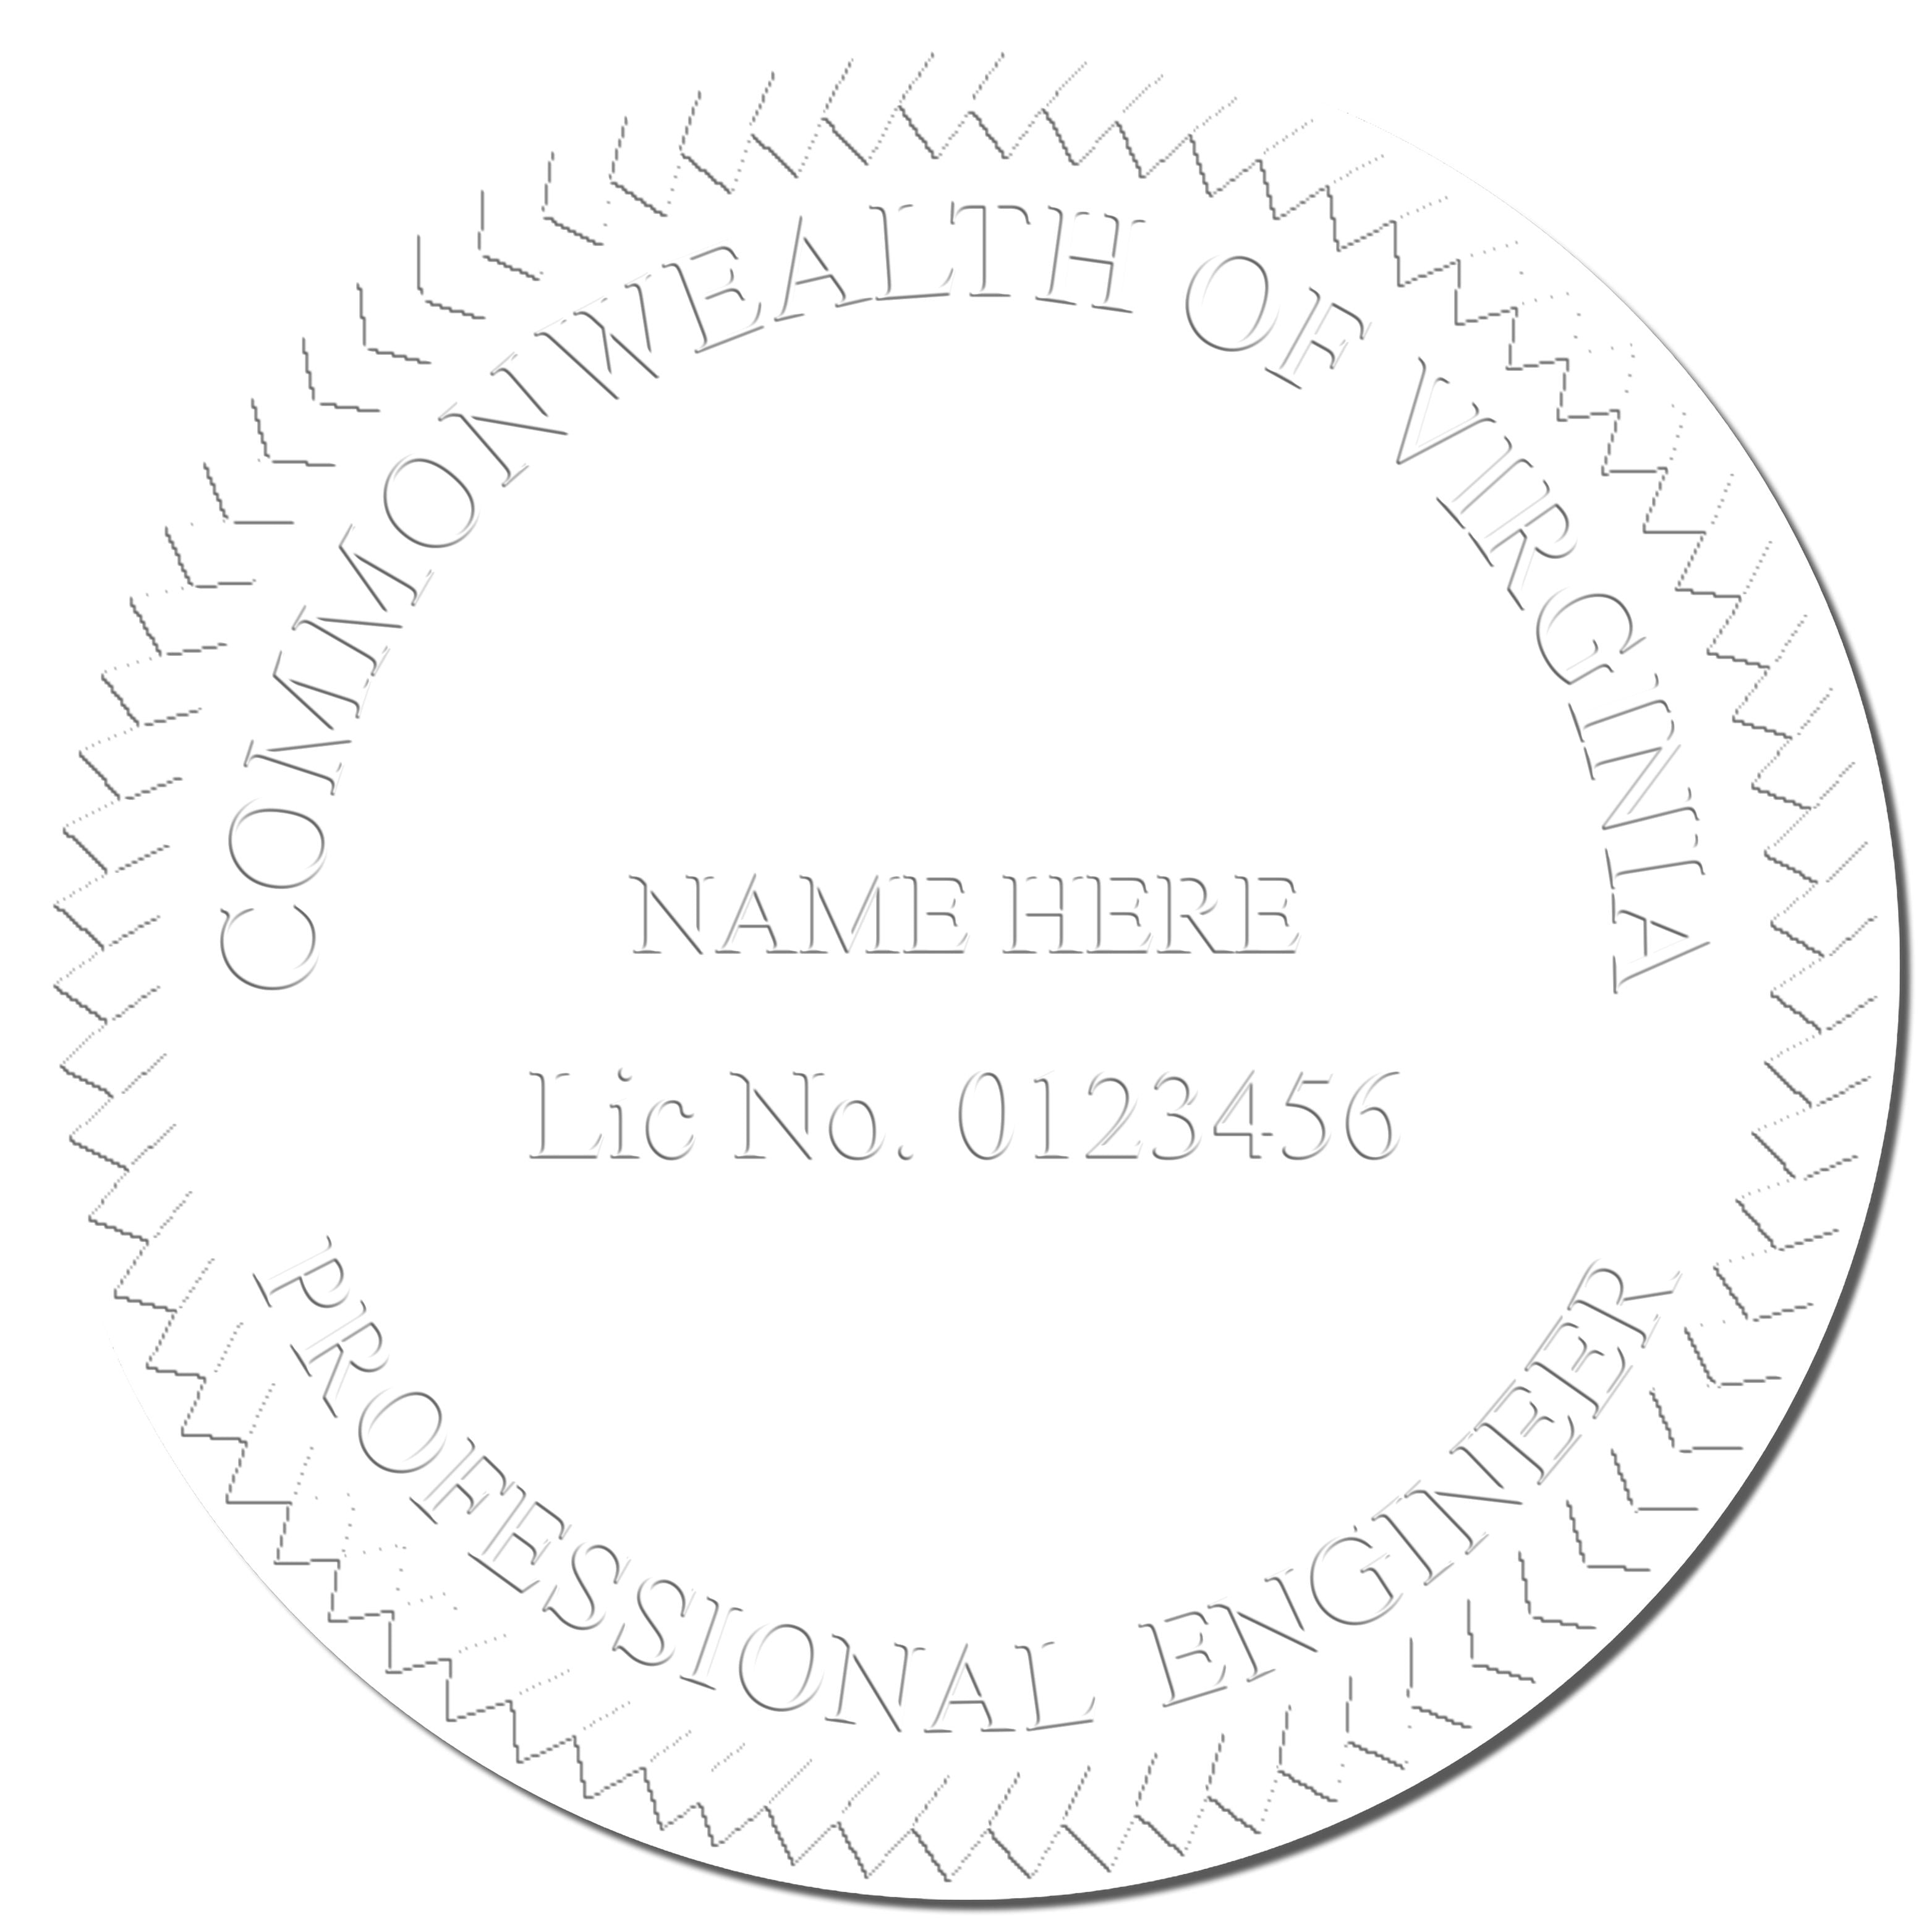 This paper is stamped with a sample imprint of the Hybrid Virginia Engineer Seal, signifying its quality and reliability.